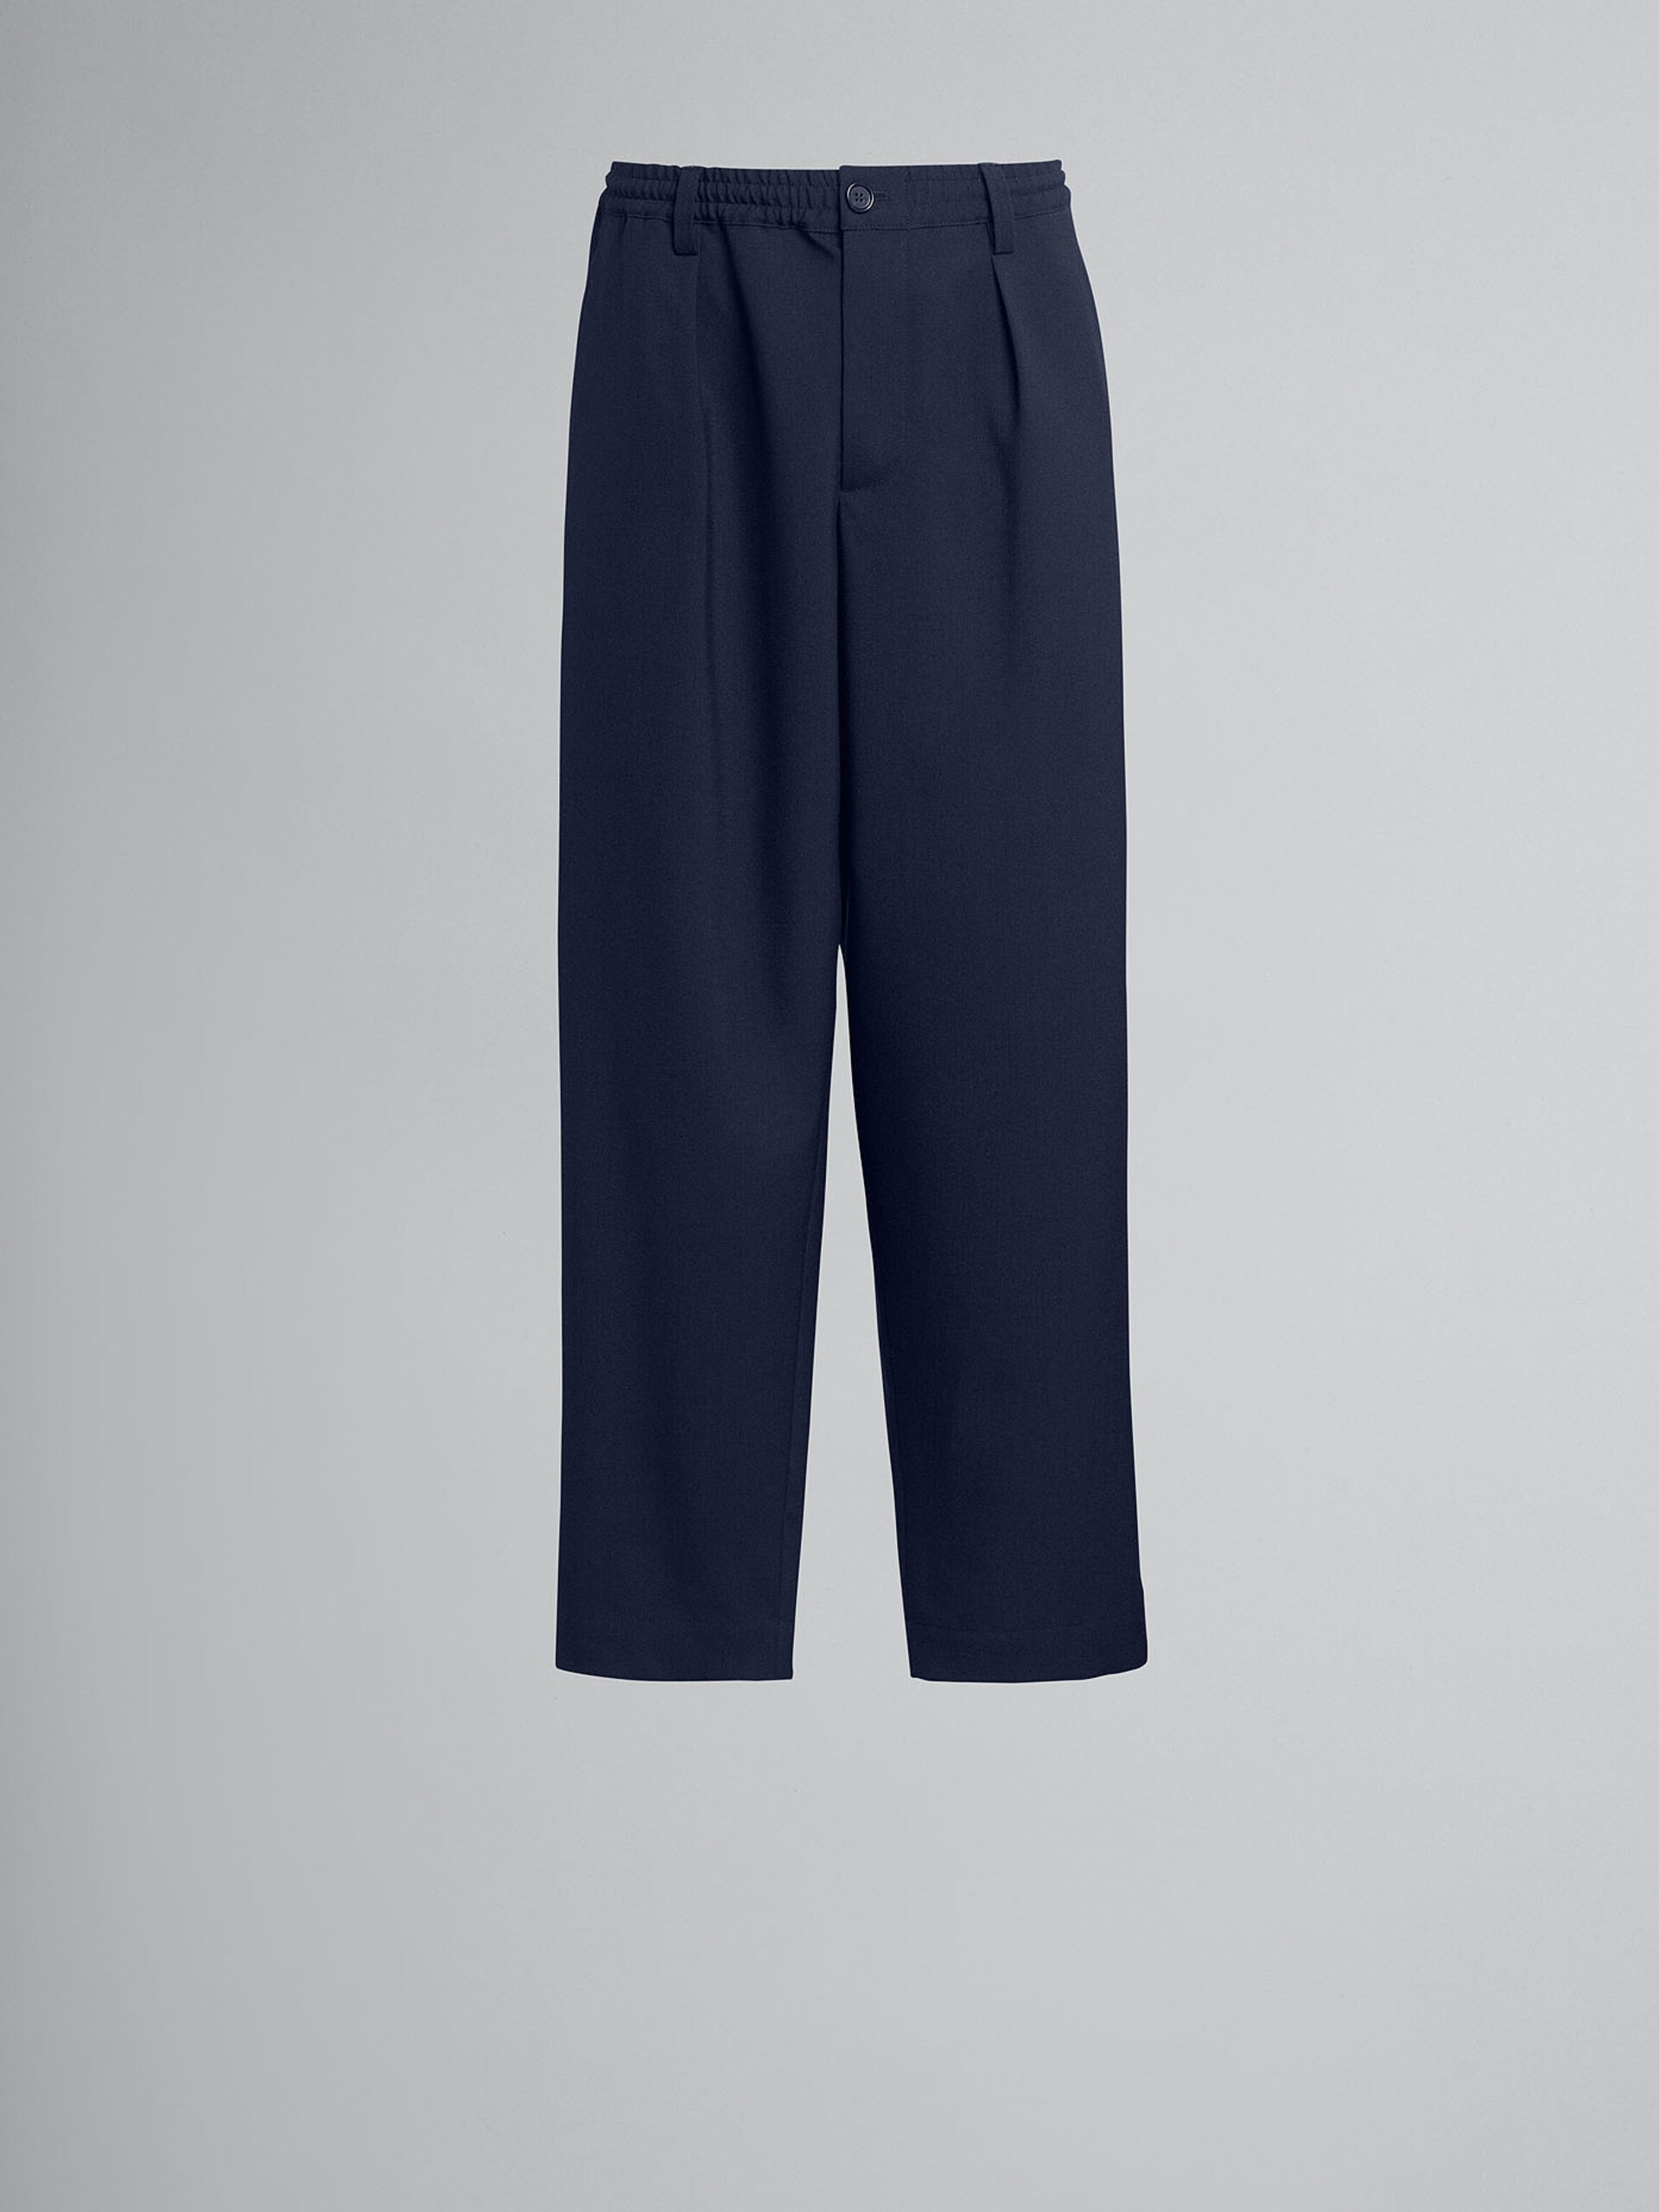 BLUE CROPPED TROUSERS IN TROPICAL WOOL - 1